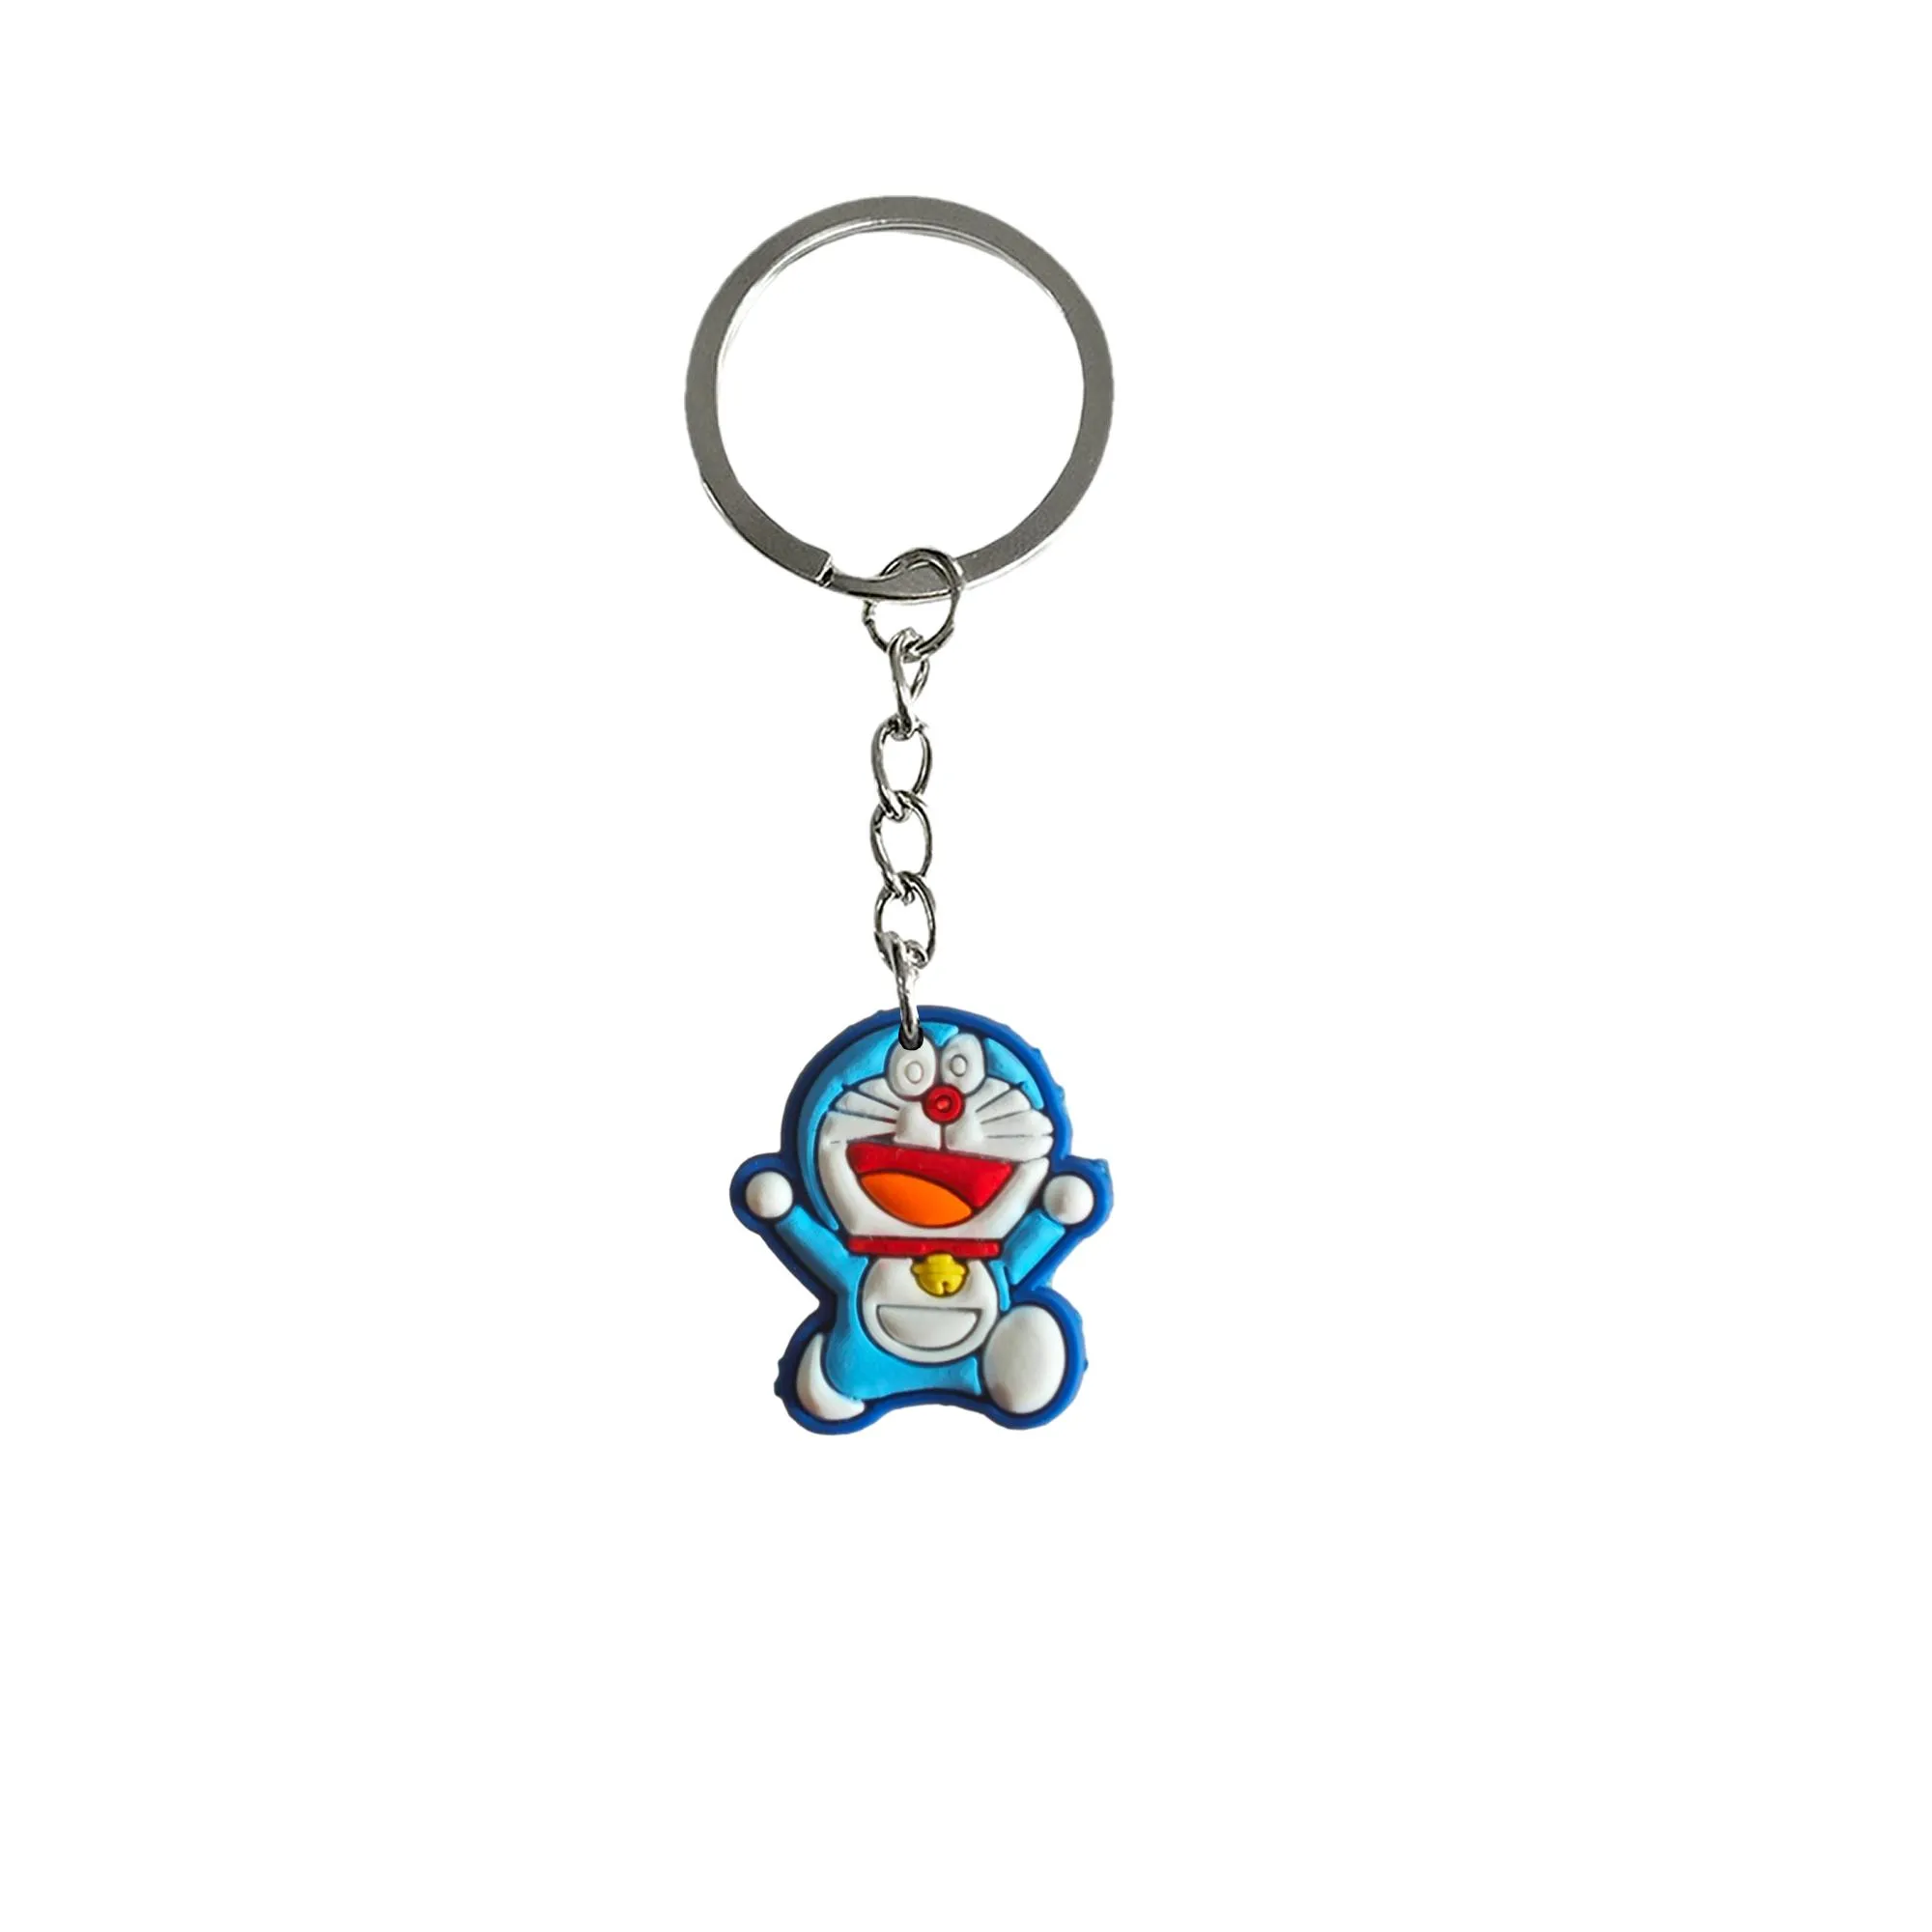 doraemon keychain key chain accessories for backpack handbag and car gift valentines day anime cool keychains backpacks boys keyring suitable schoolbag colorful character with wristlet purse charms women rings